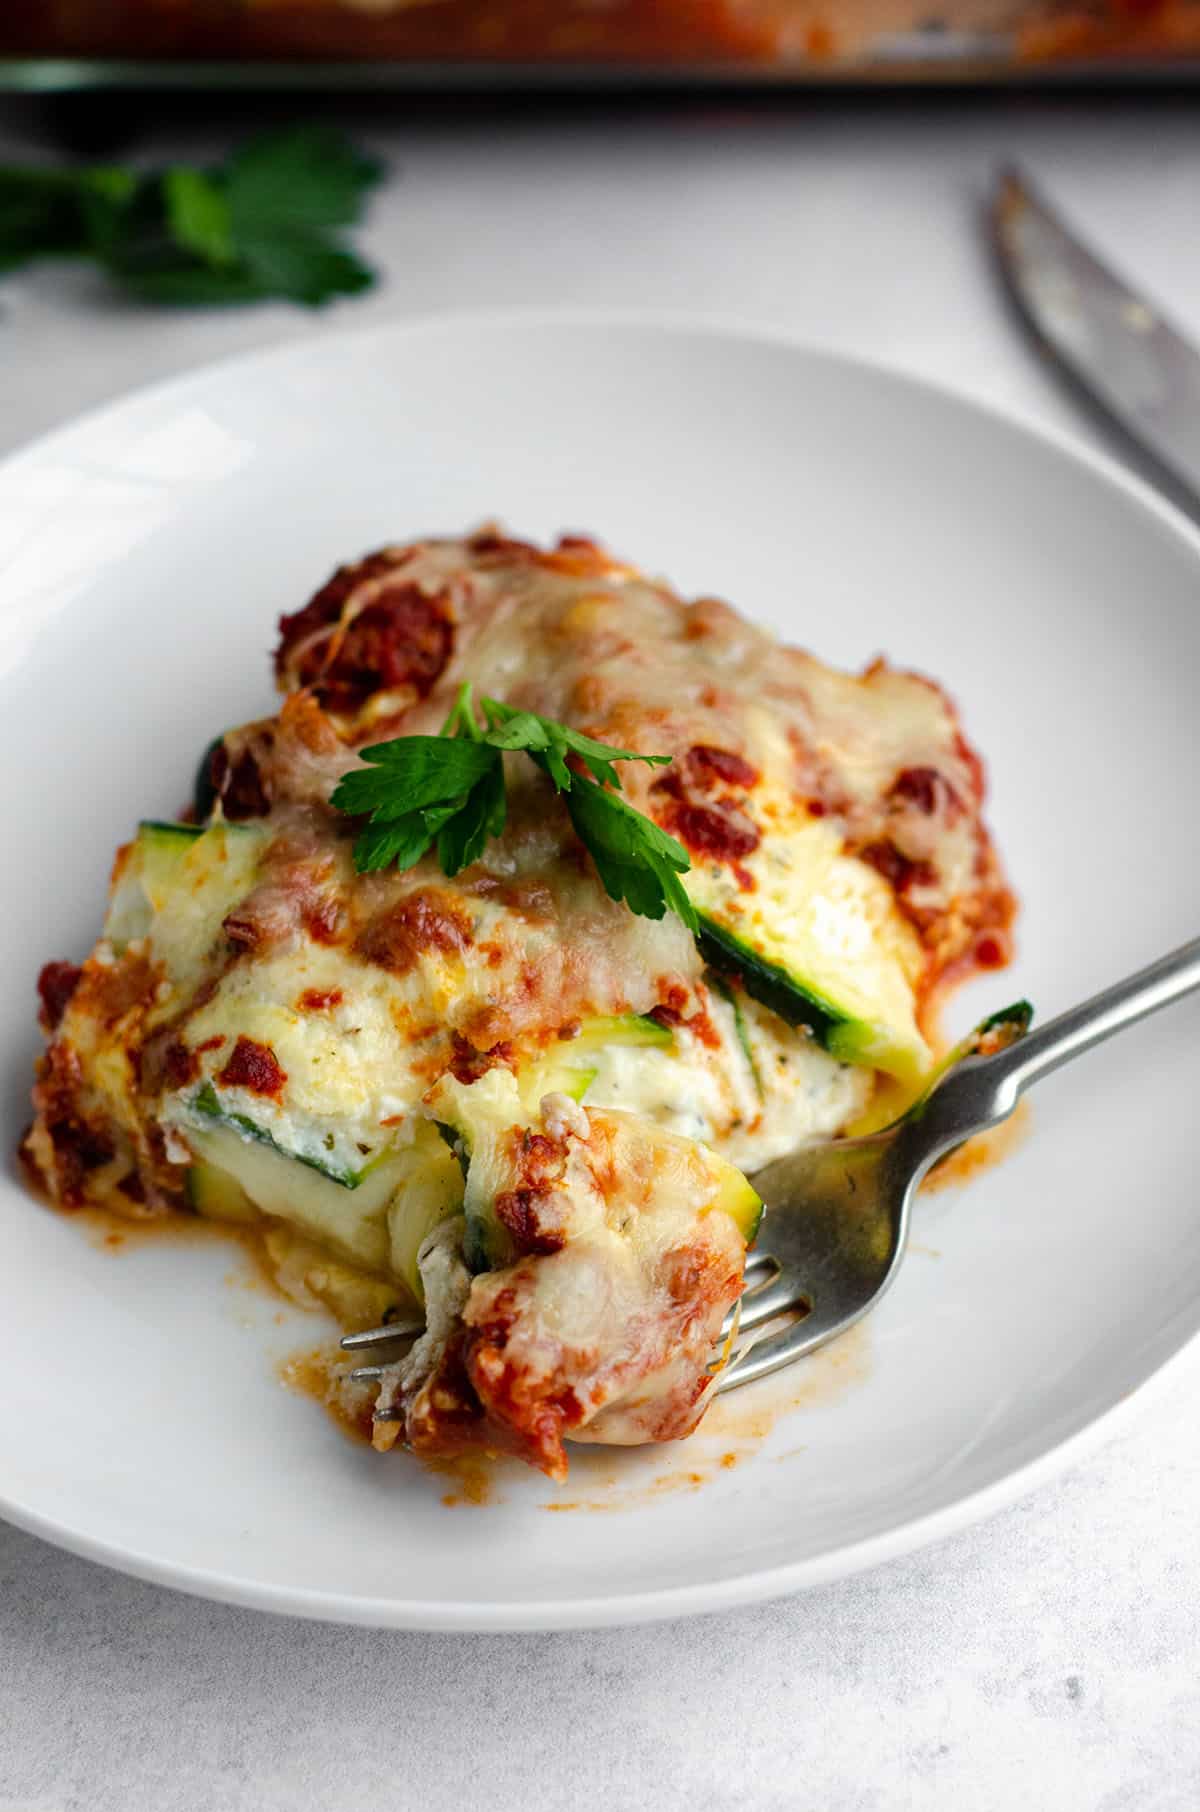 zucchini ravioli sitting on a plate with a fork full of a bite